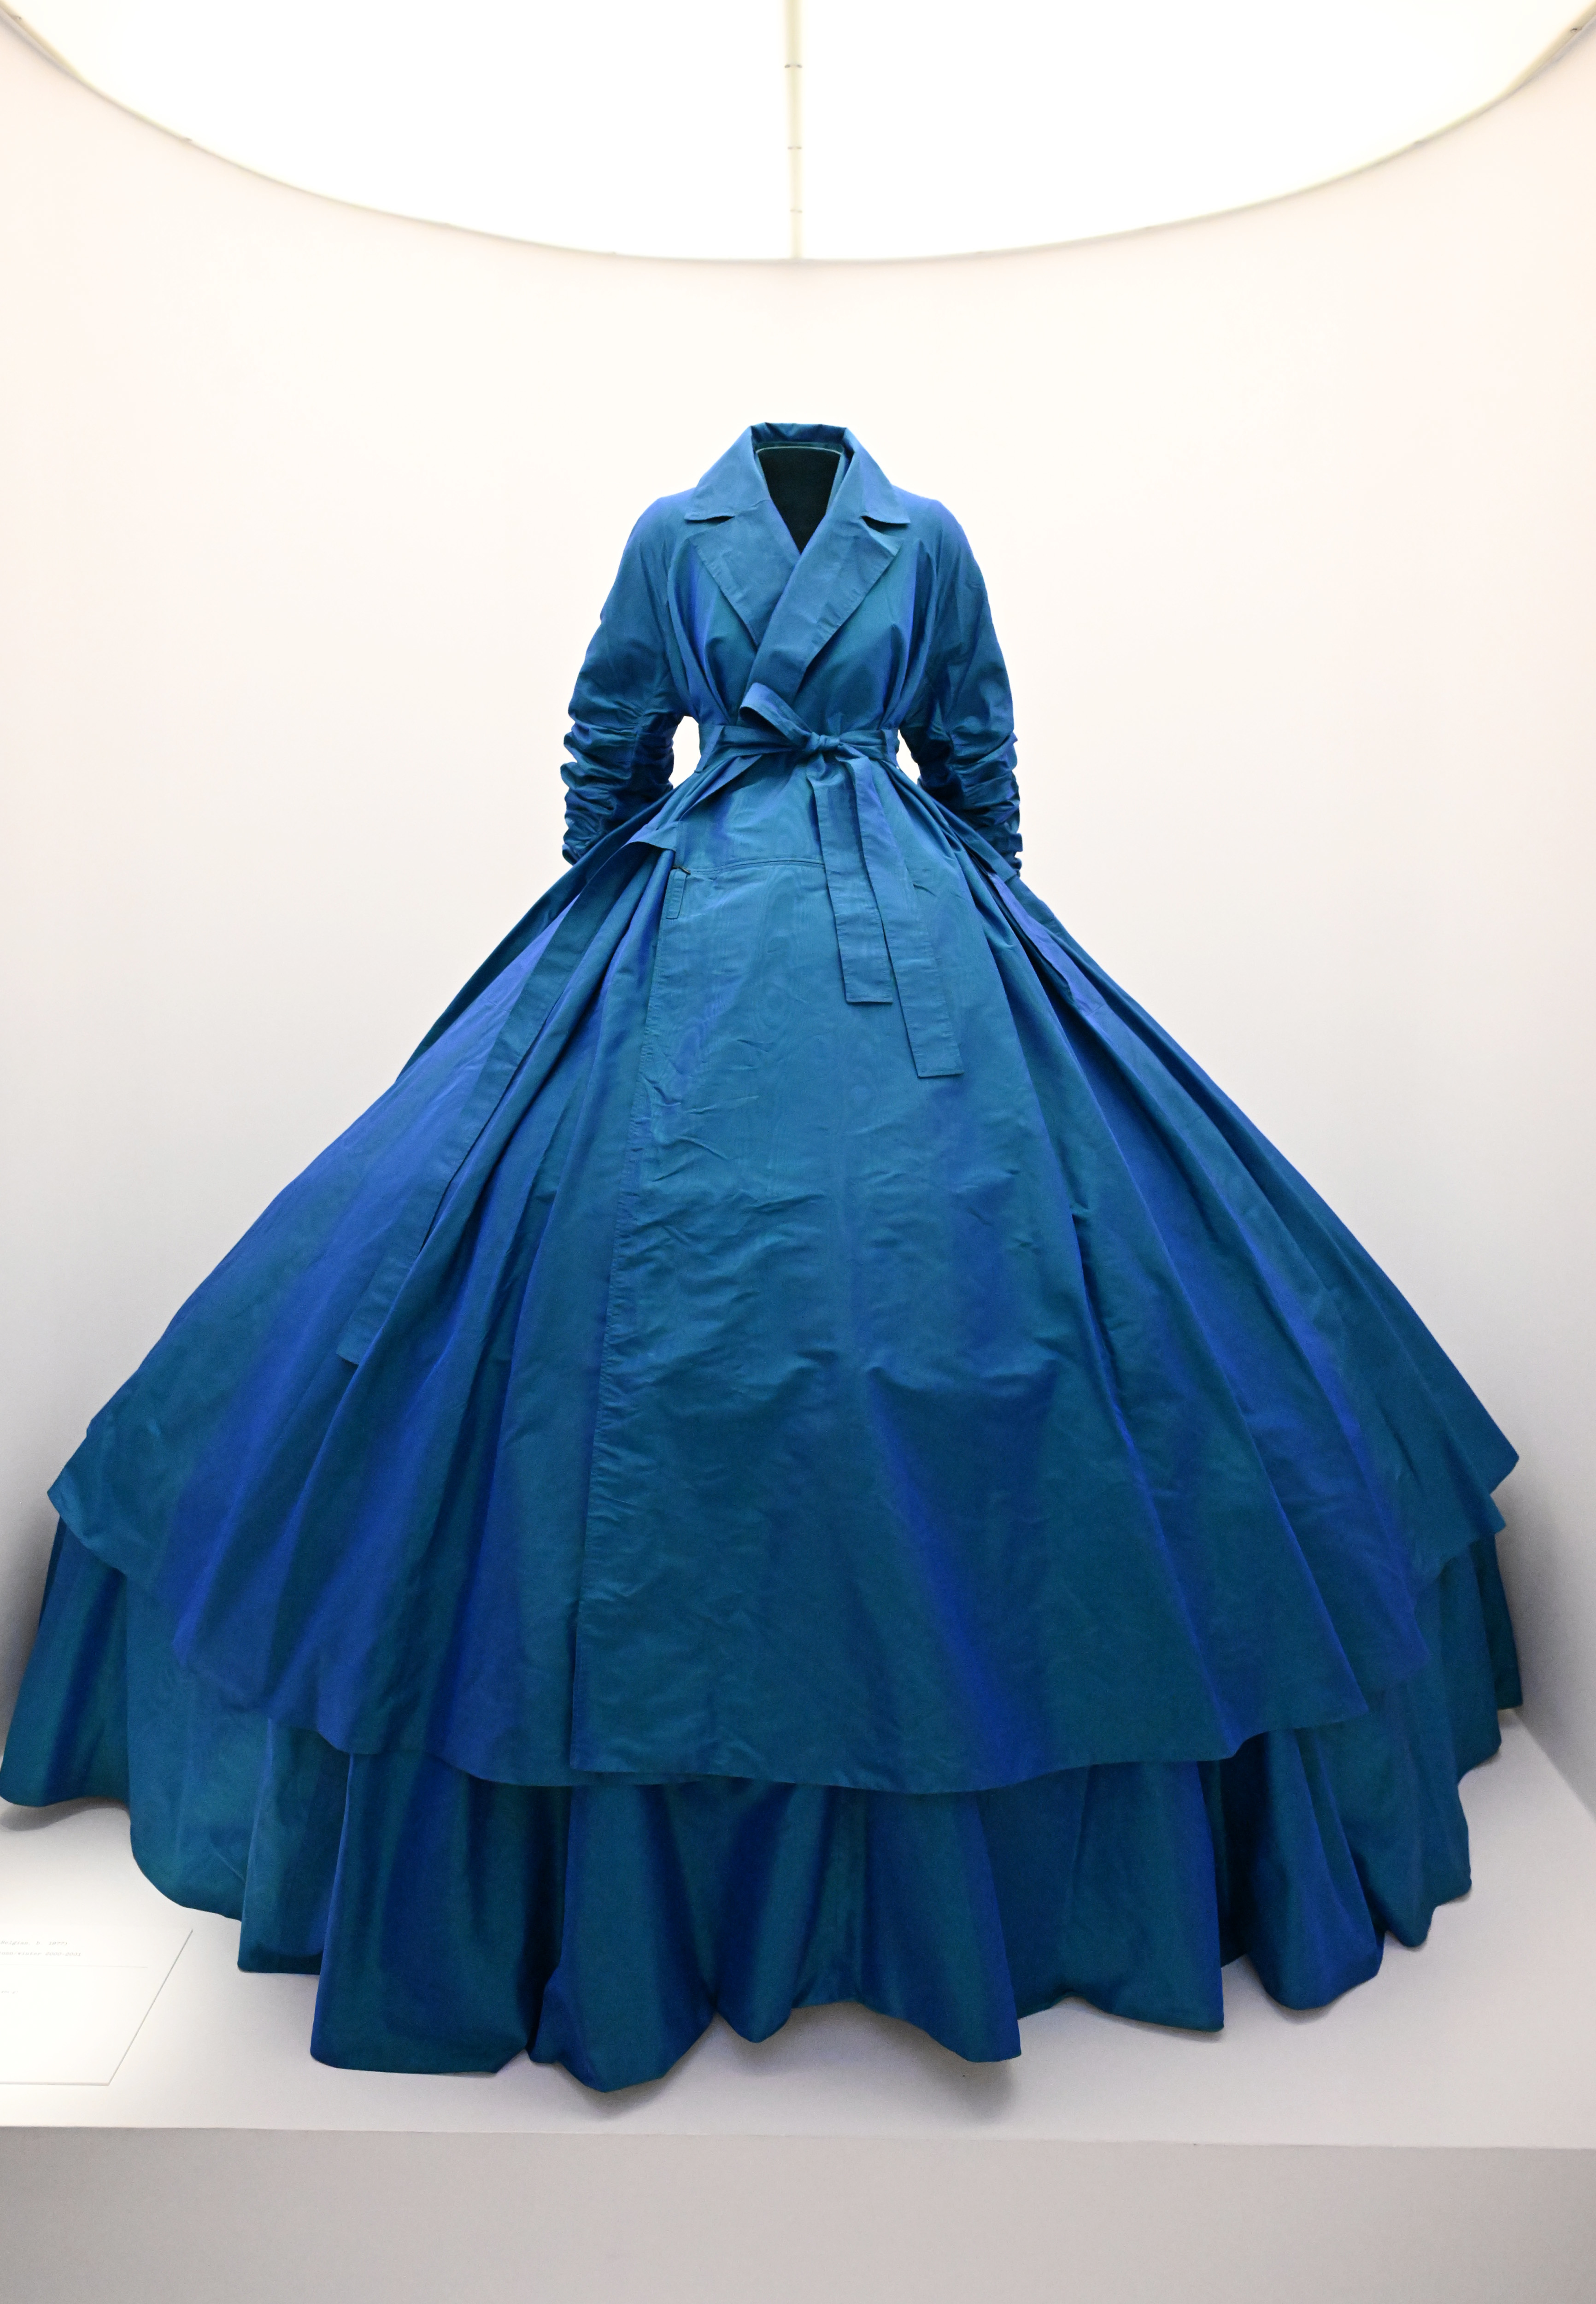 Elegant blue gown displayed on a mannequin with a voluminous skirt and fitted bodice